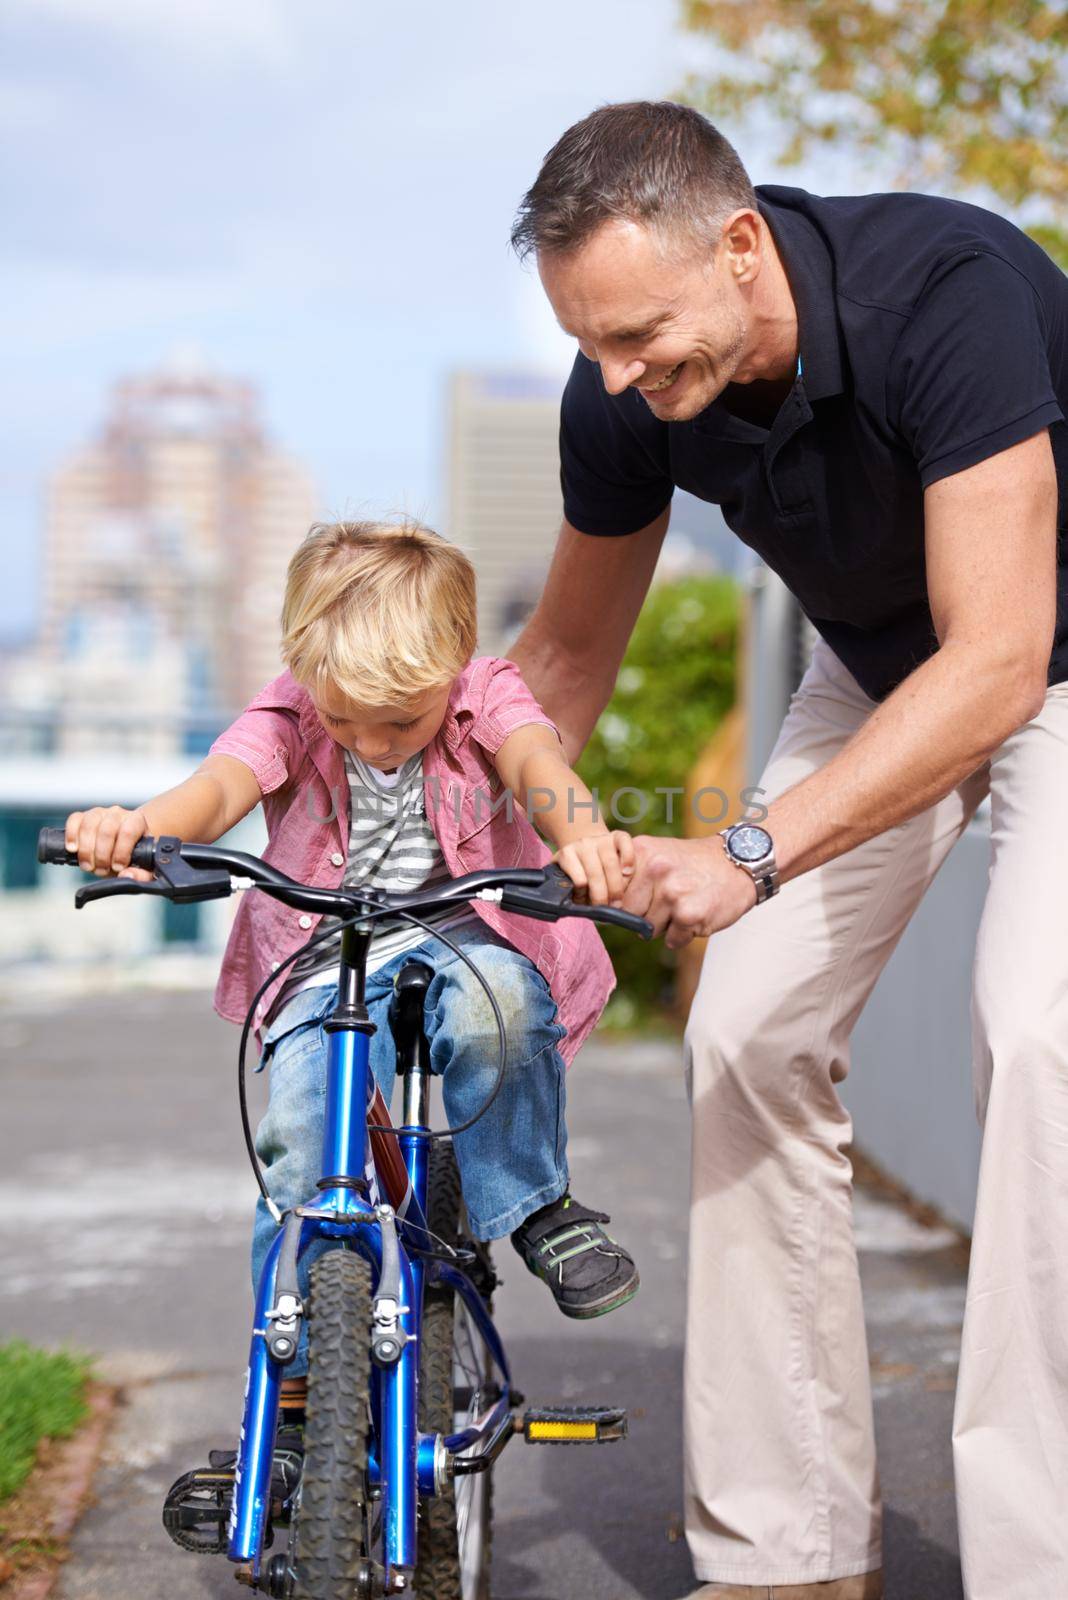 His first bike ride. A father teaching his young son to ride a bike